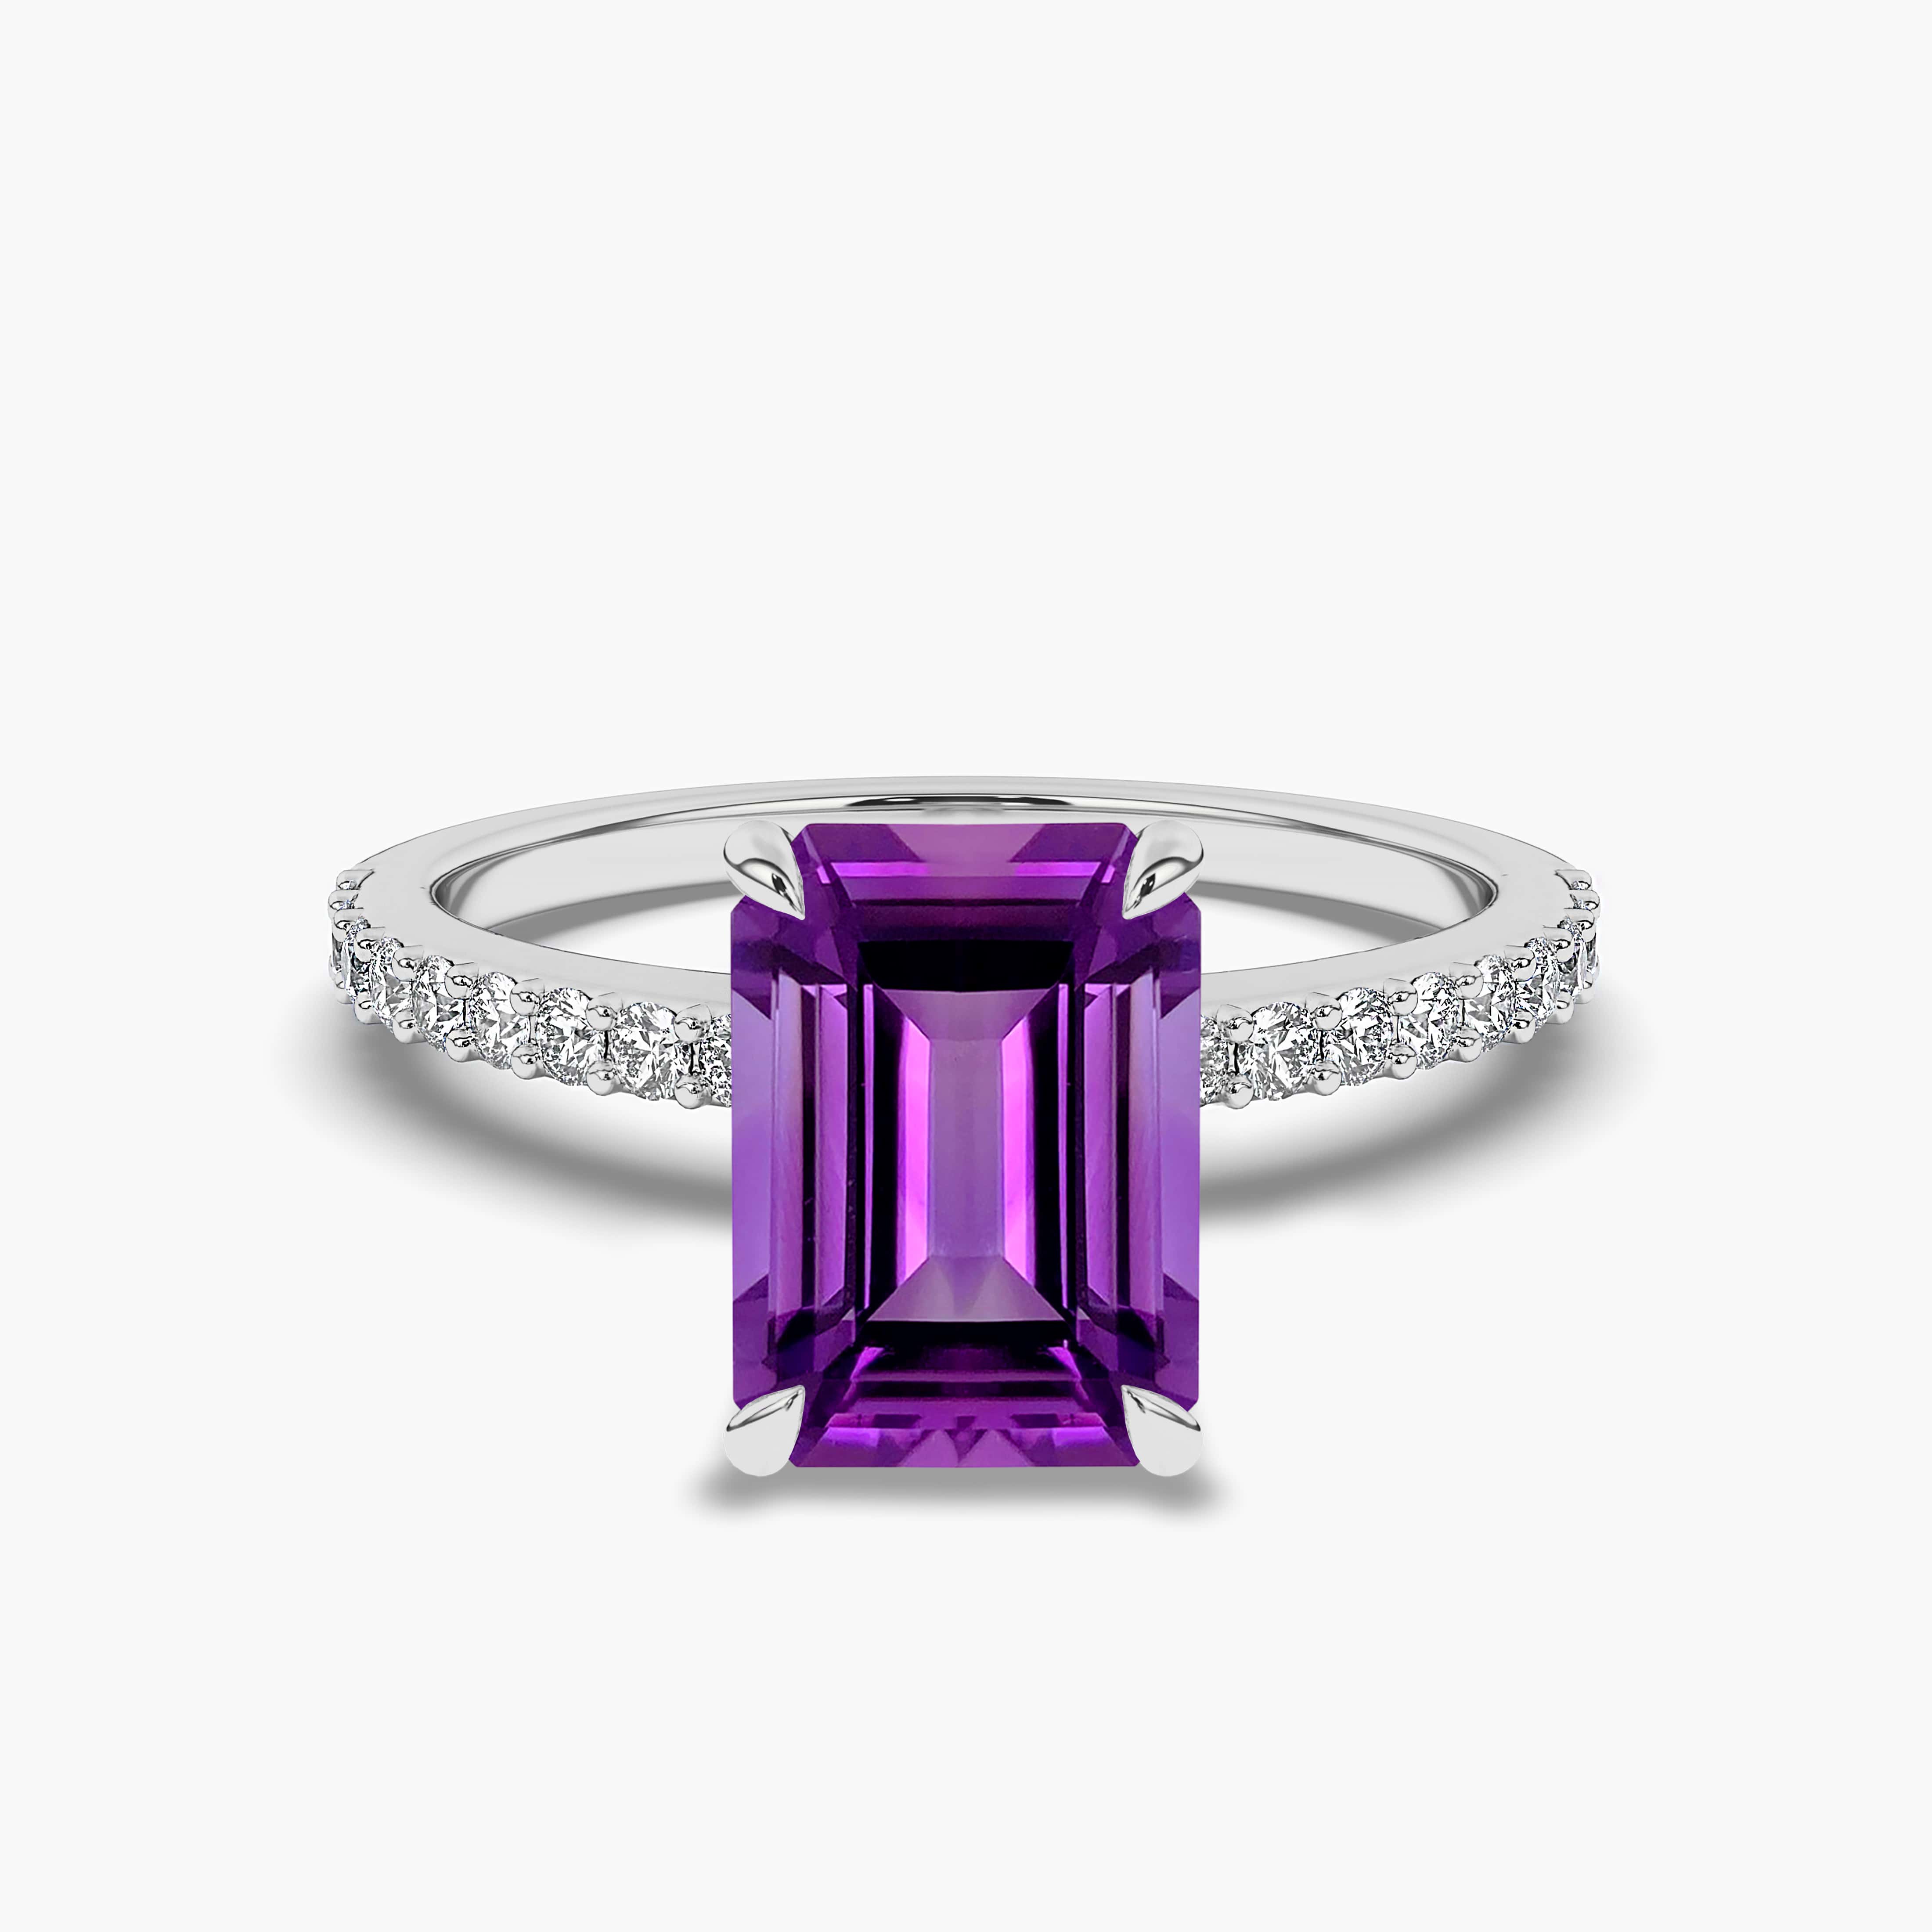 Emerald-Cut Amethyst Solitaire Engagement Ring in White Gold